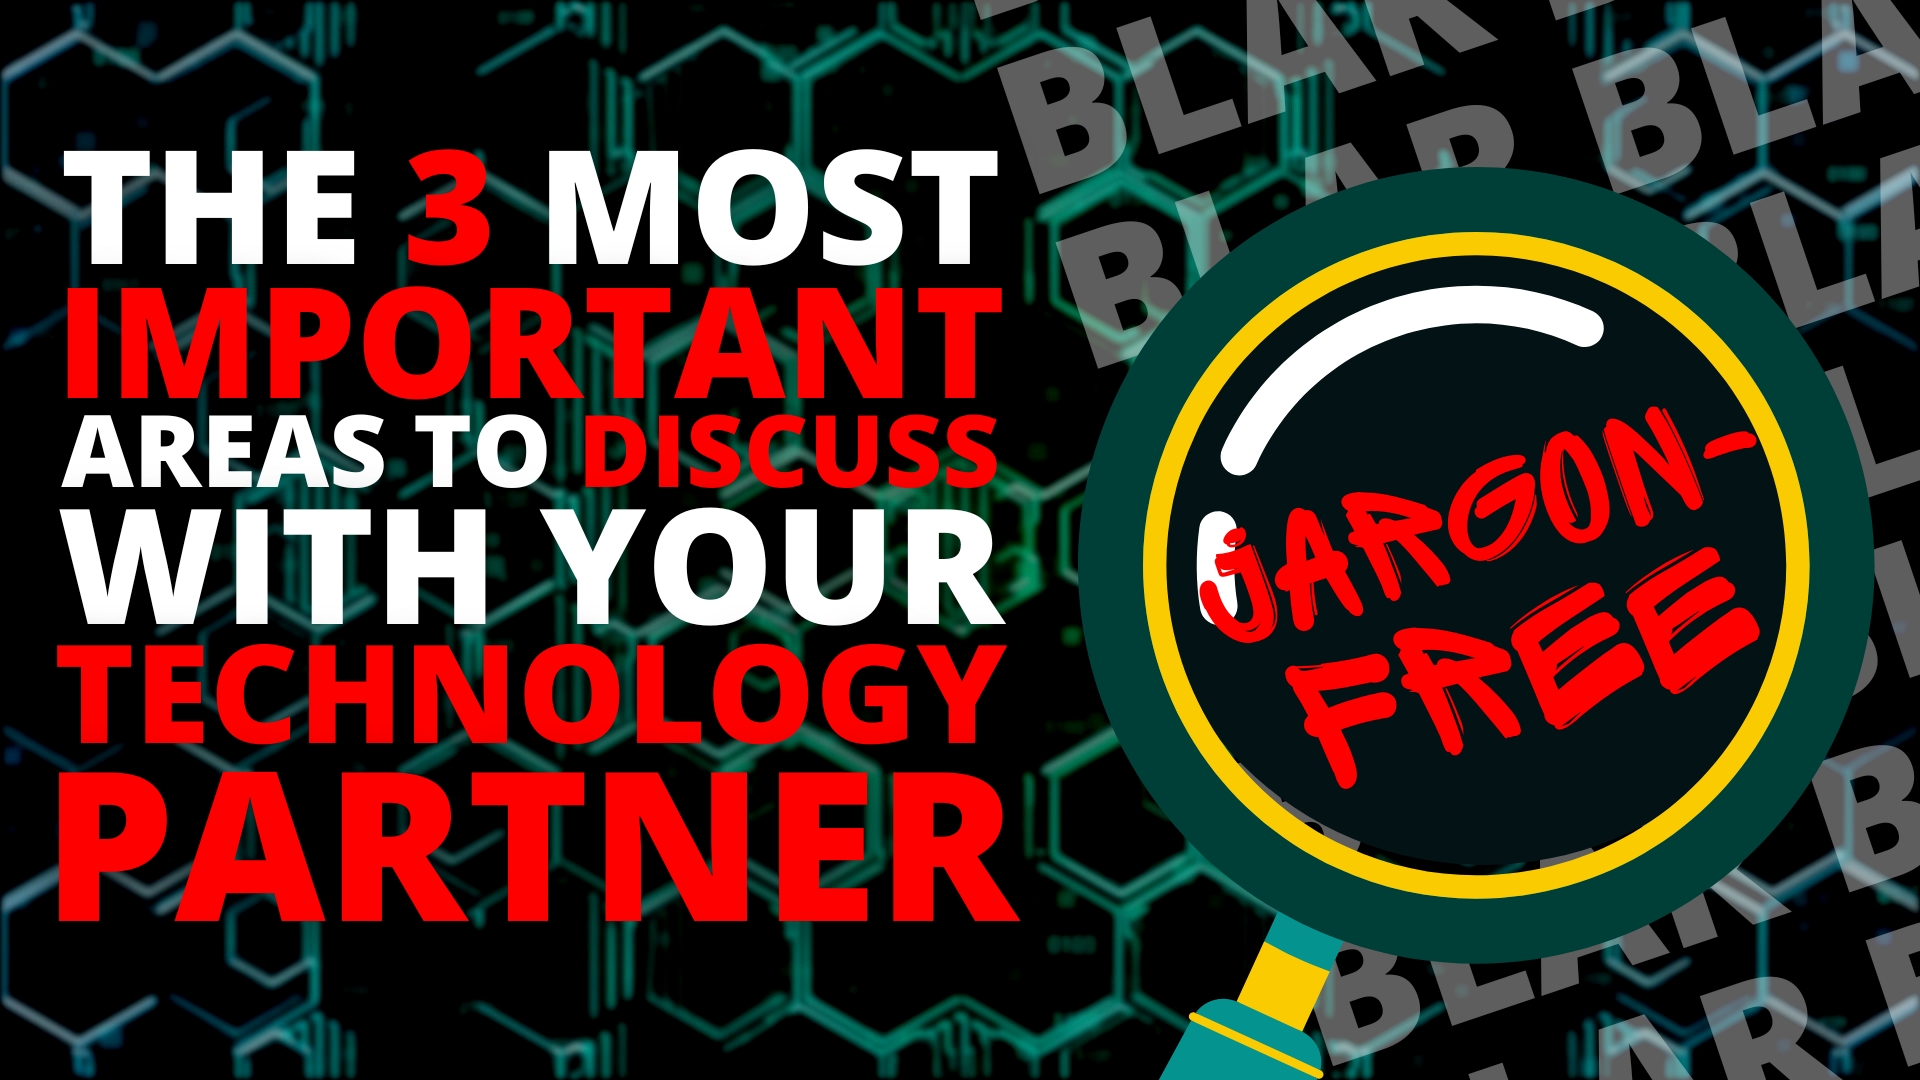 the 3 most important areas to discuss with your technology partner